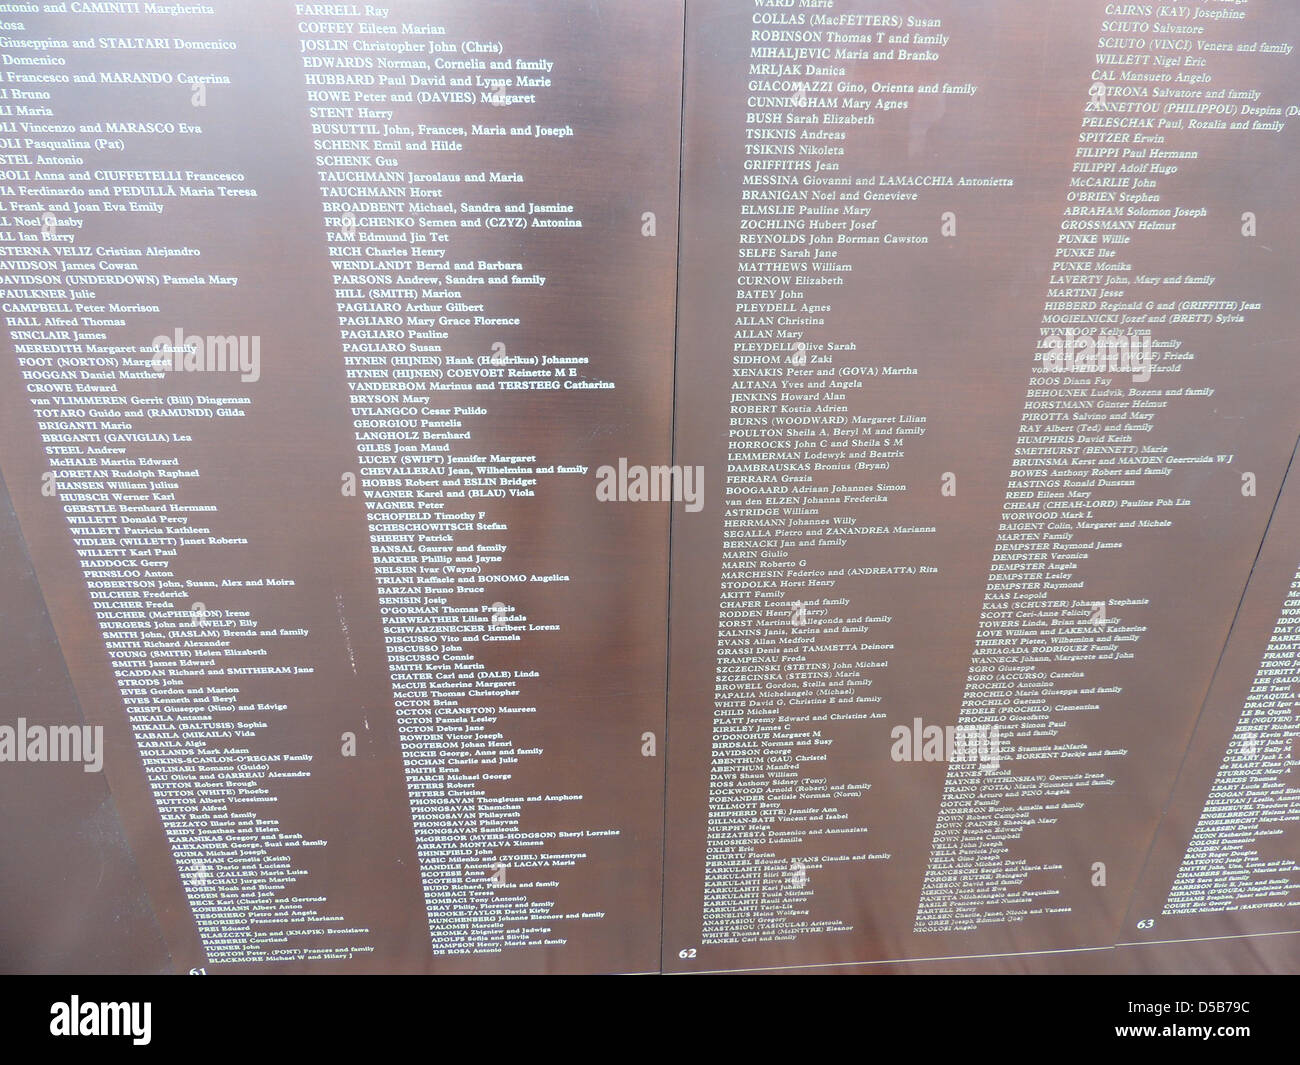 DARLING HARBOUR, Sydney, Australia. Names of immigrants on the Welcome to Australia memorial. Photo Tony Gale Stock Photo